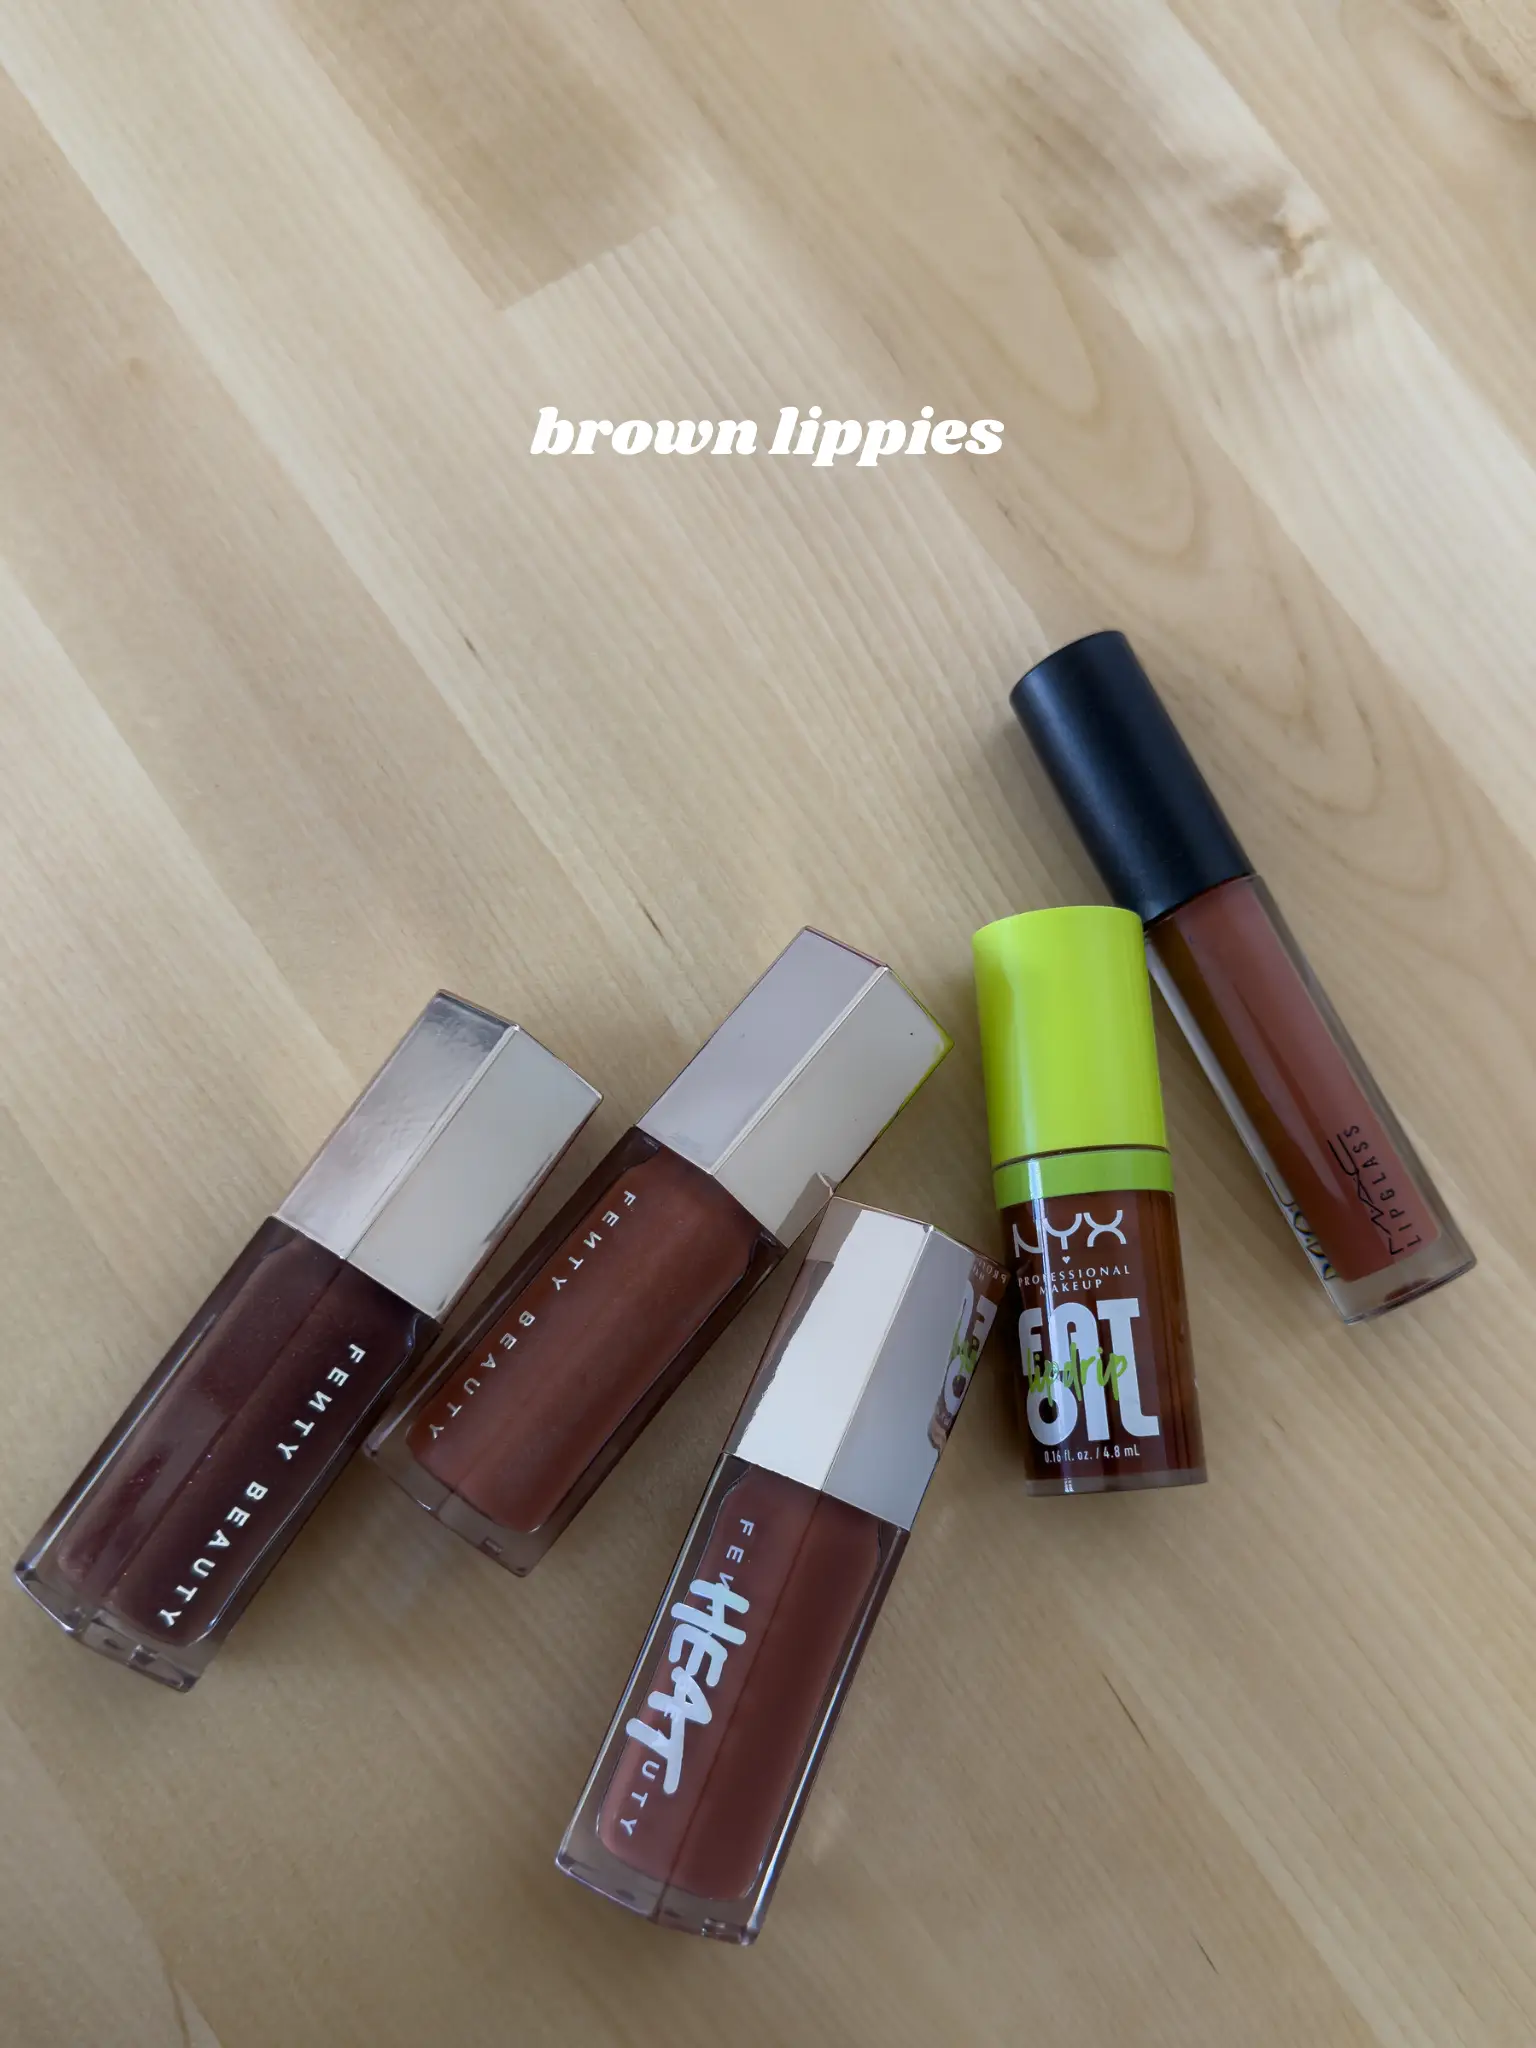 Brown lippies 💄's images